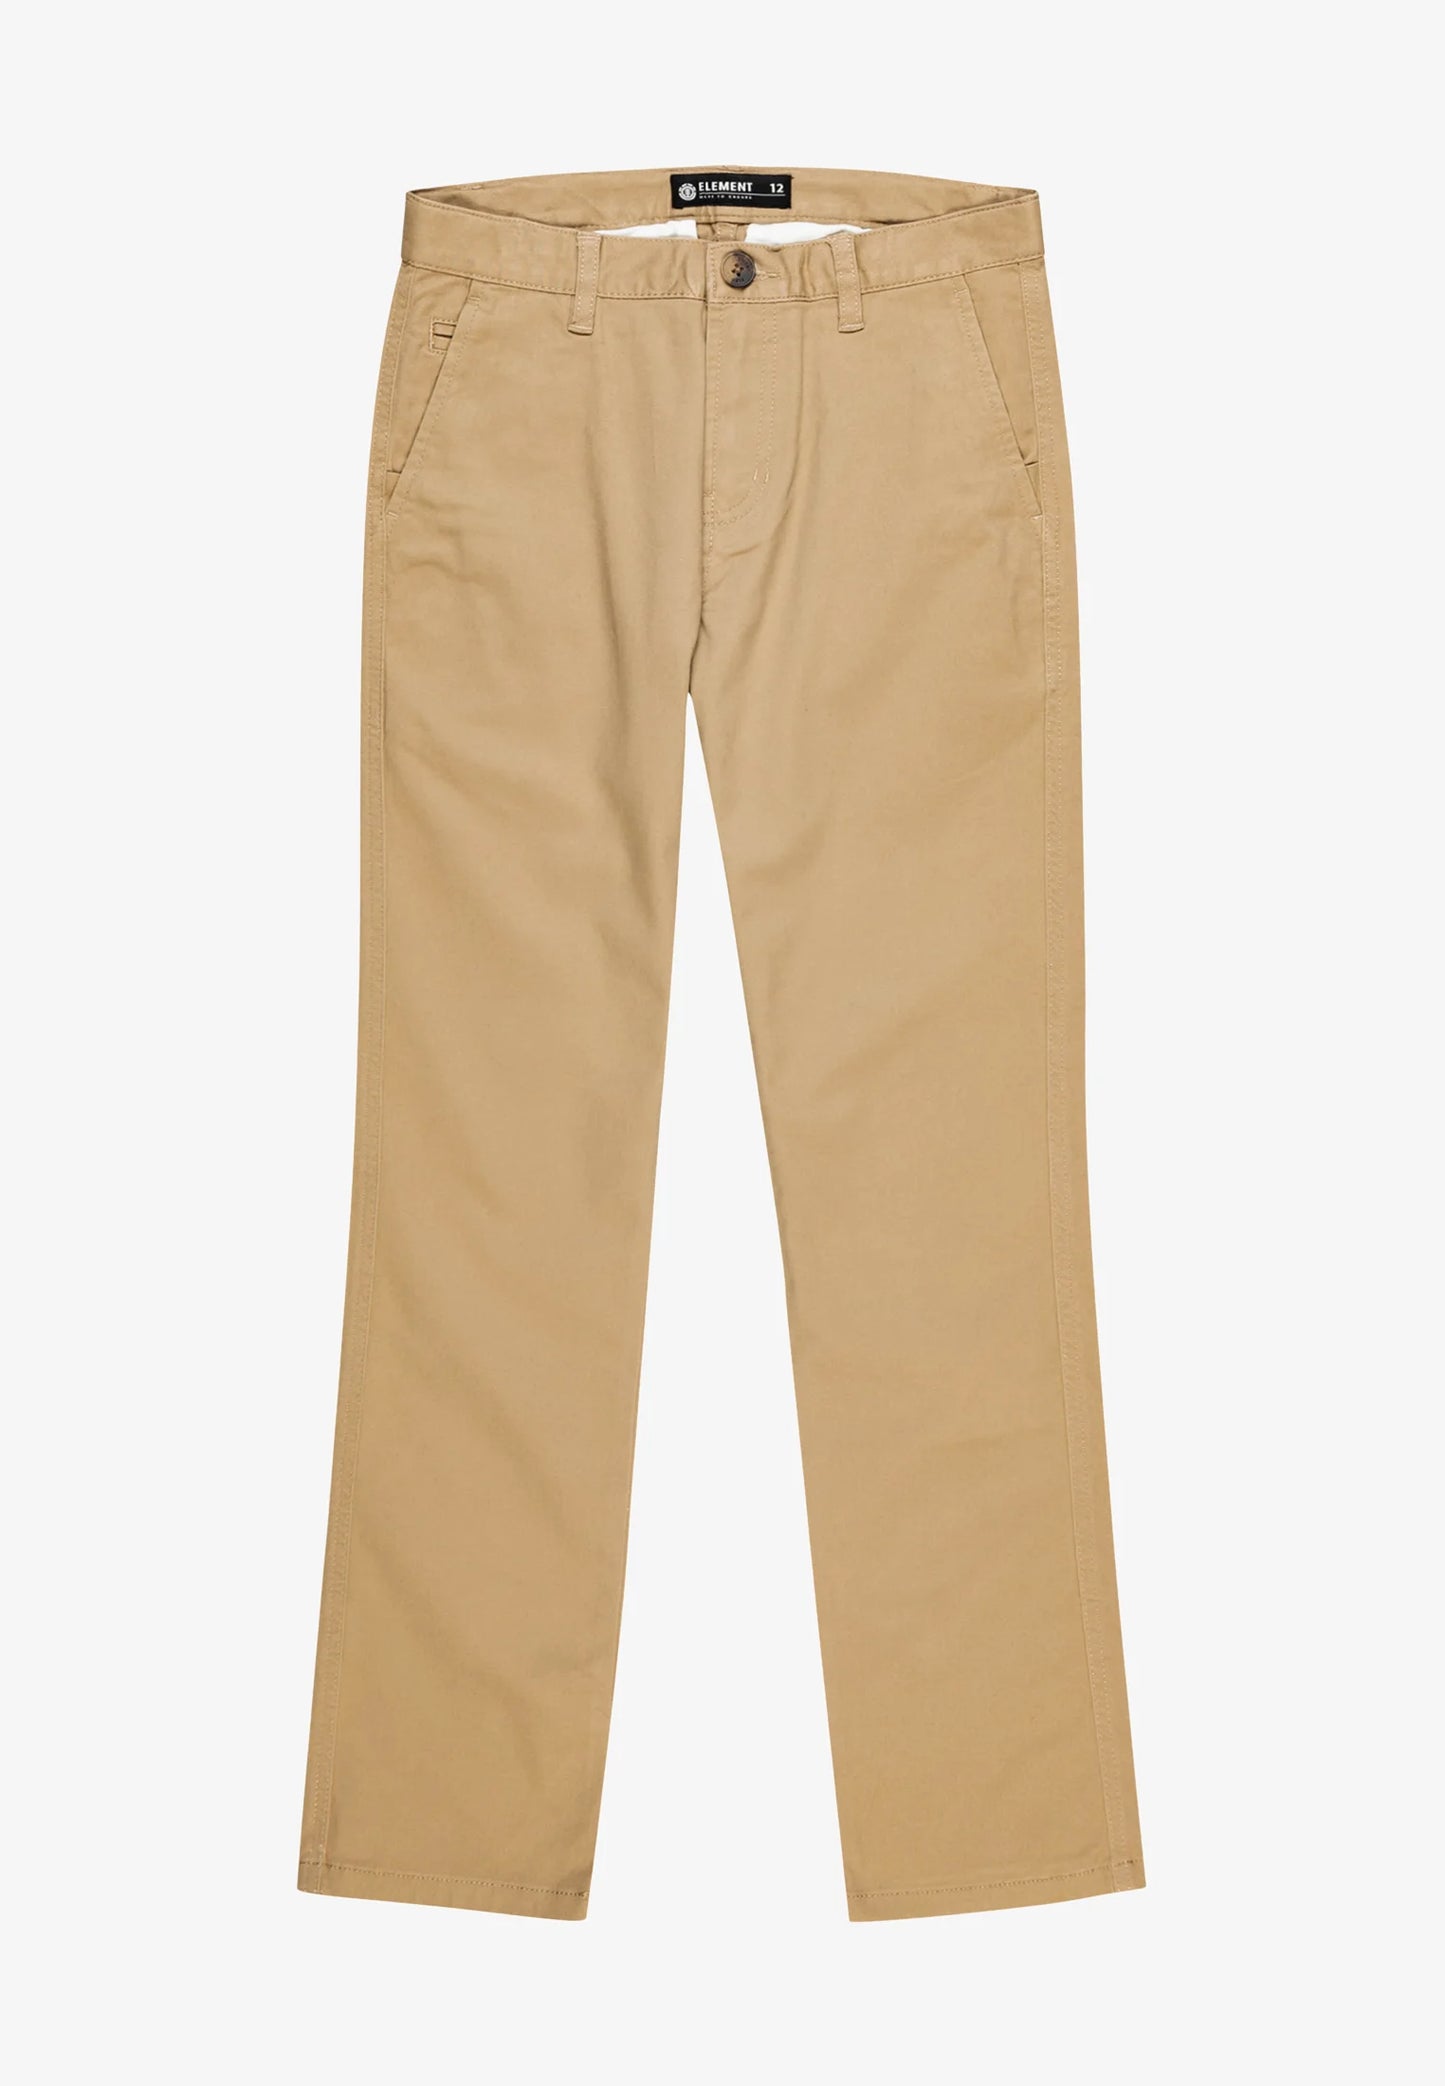 ELEMENT - HOWLAND CLASSIC CHINO YOUTH - BEIGE